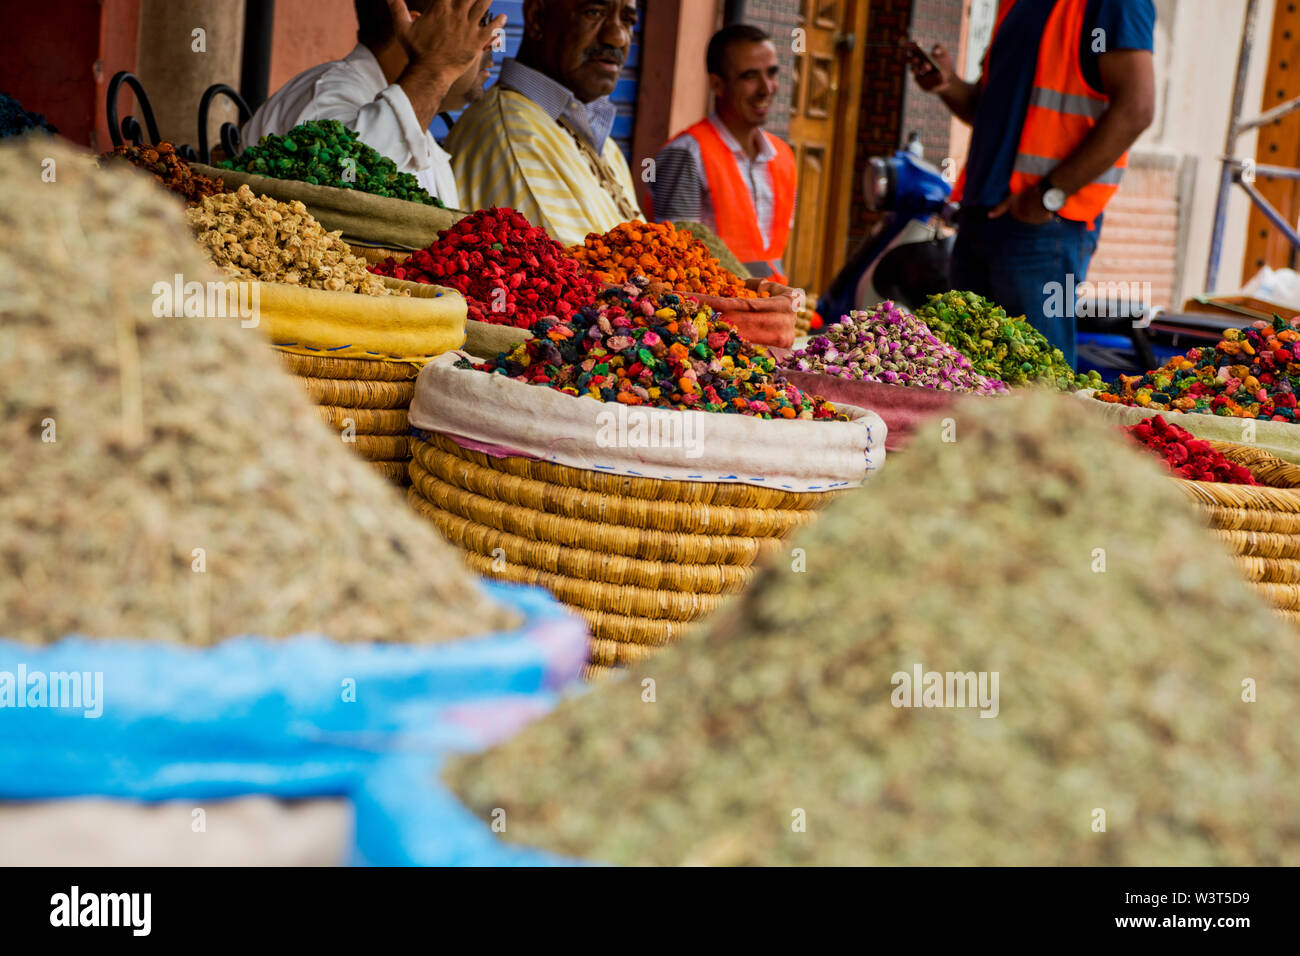 Local Moroccan stalls selling nuts, sweet goods in the streets, alleyways of Marrakech going about daily arabic life in the cultural Medina Stock Photo